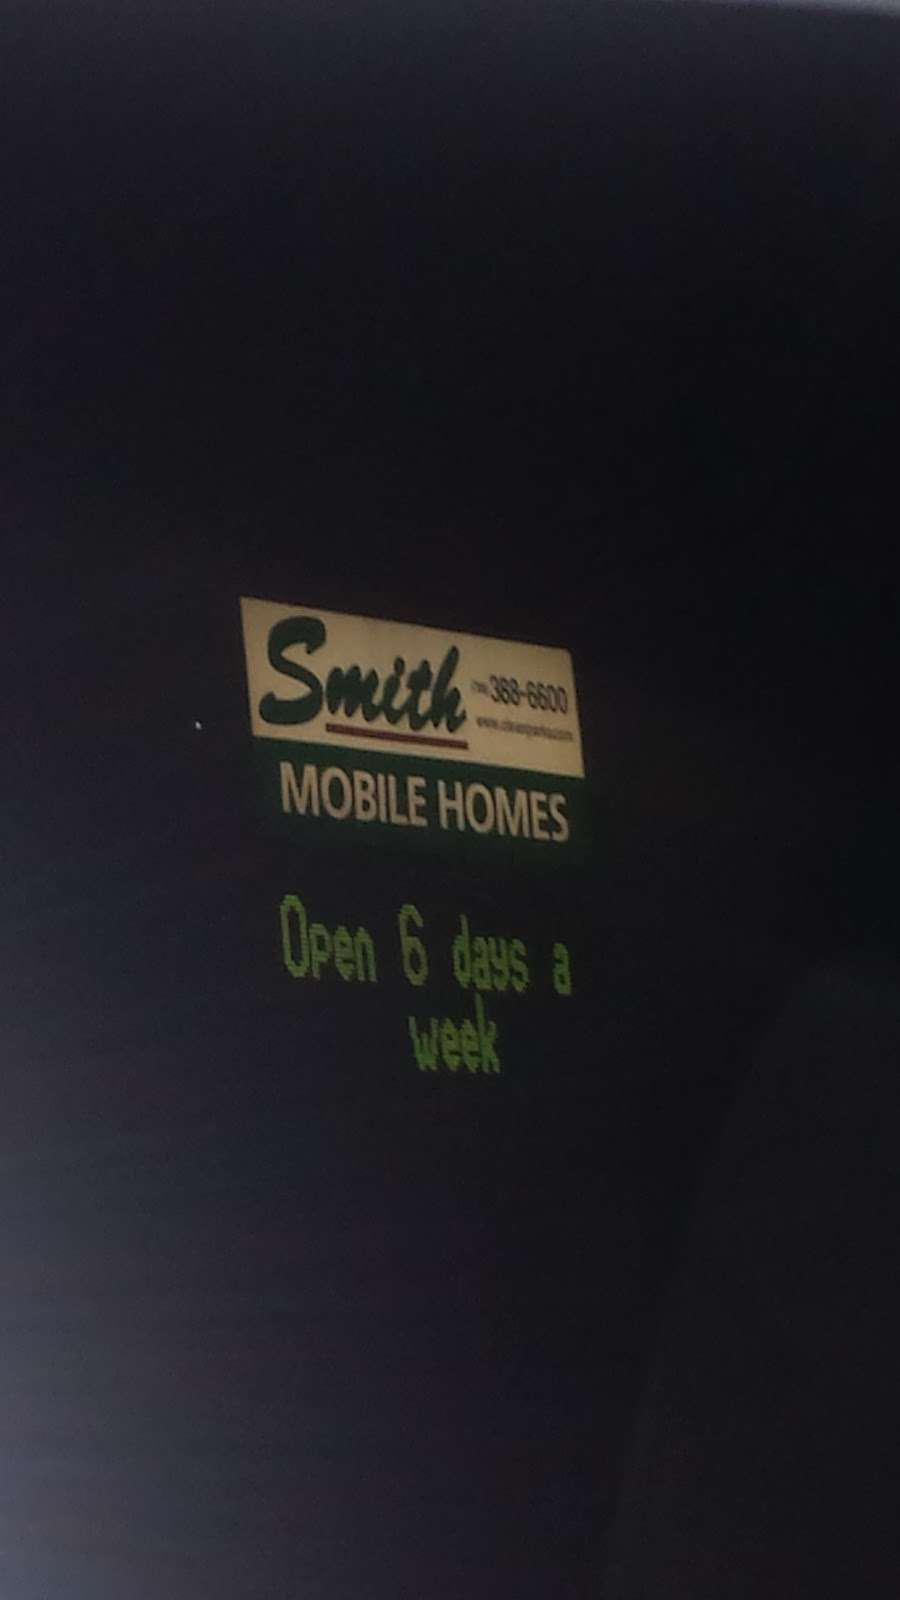 Smith Mobile Home Park | 14115 S Western Ave, Blue Island, IL 60406 | Phone: (708) 388-6600